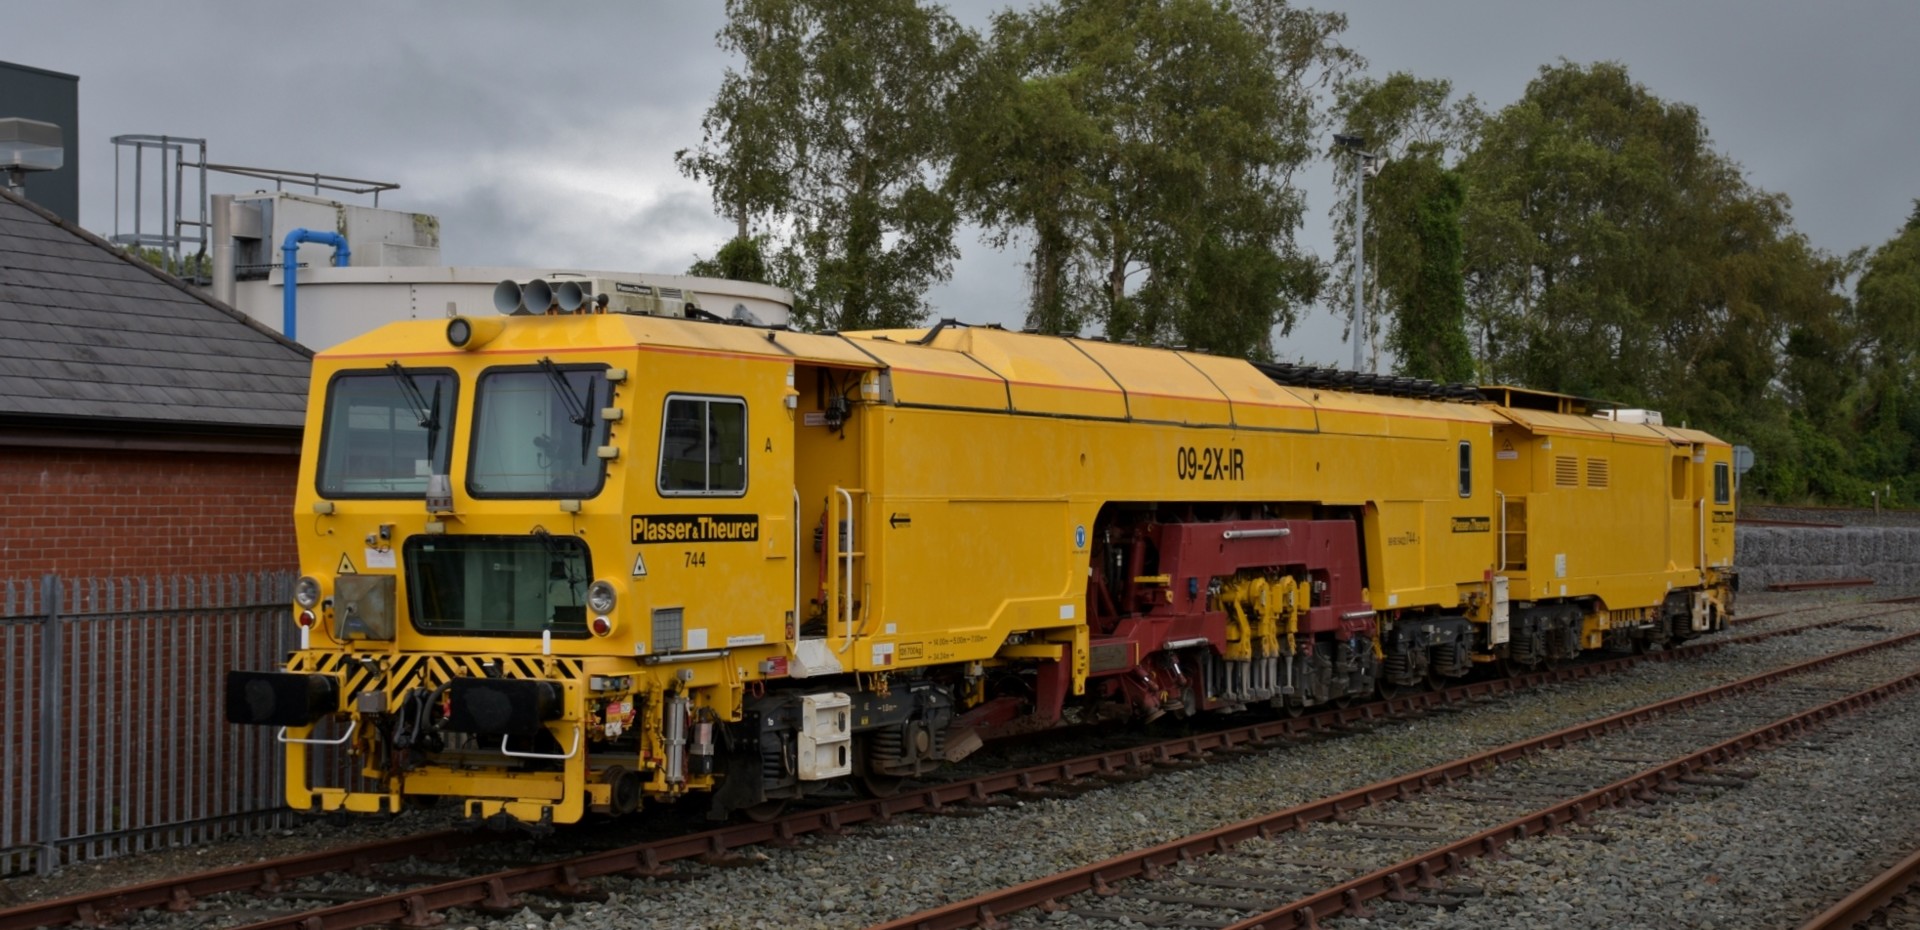 744 stabled at Killarney after working overnight between Killarney and Rathmore